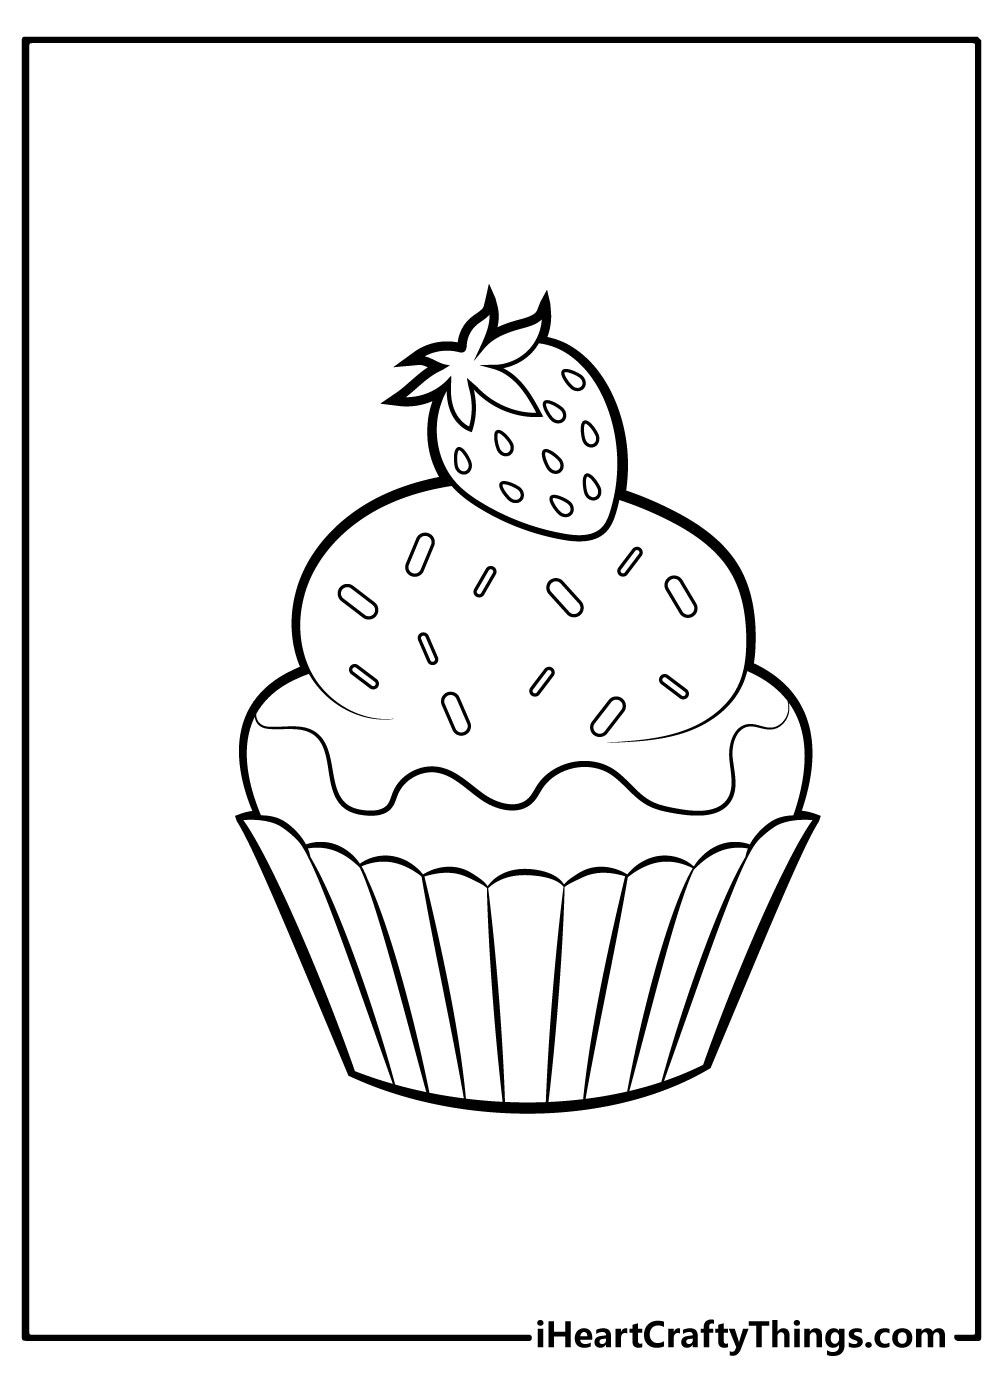 shopkins Cupcake Coloring Pages free printable